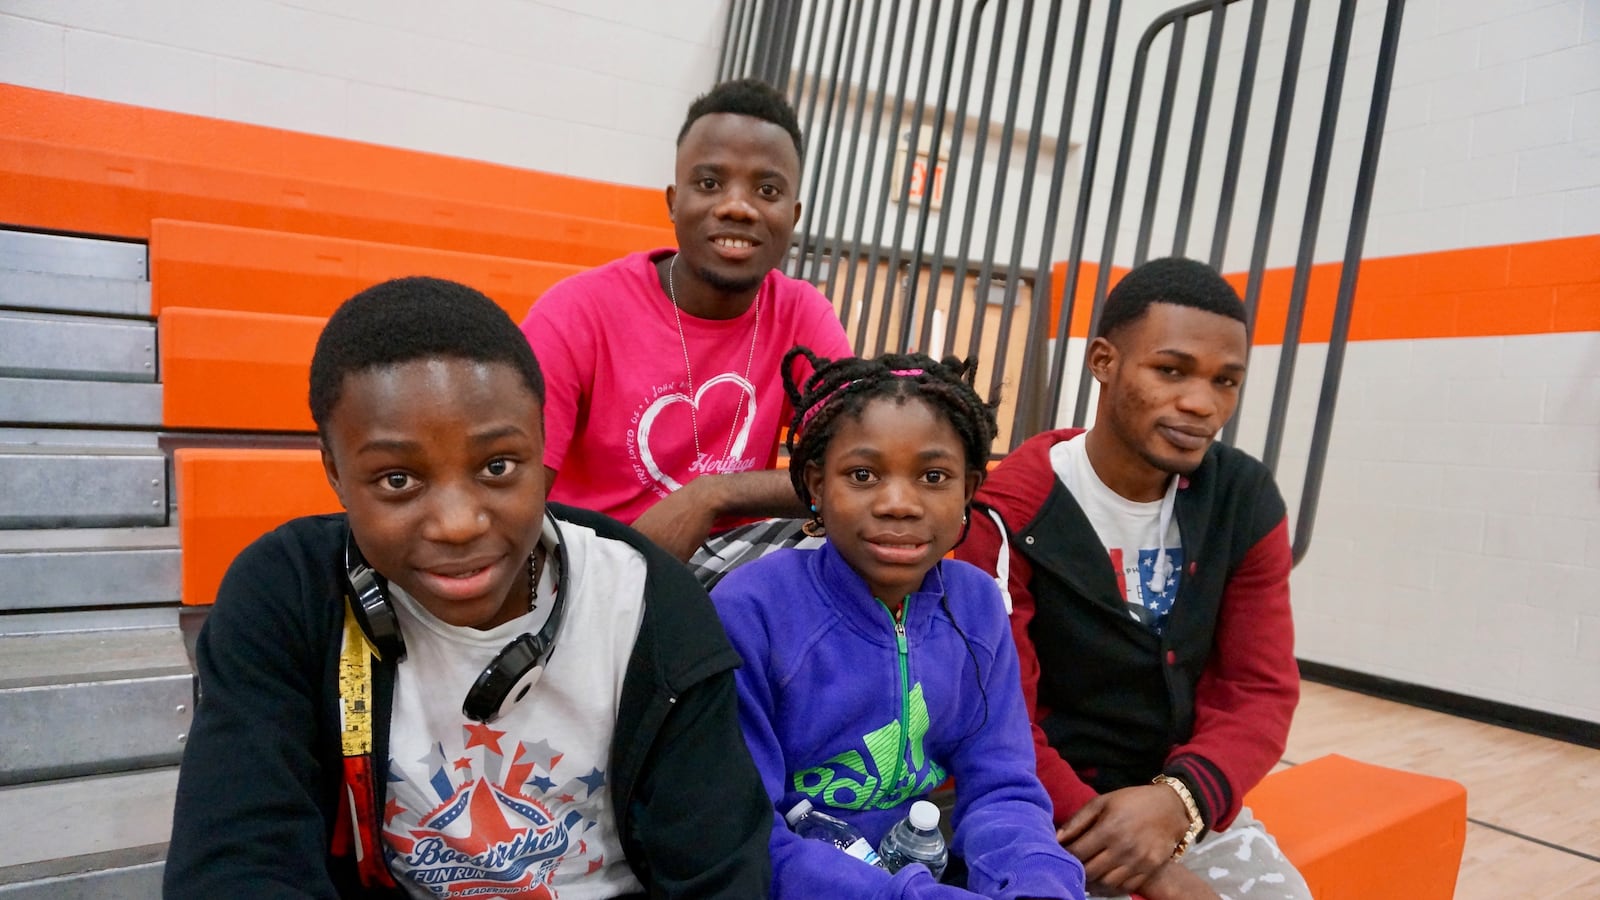 Mbeomo and Tosha Msambilwa with their older brothers. The Msambilwa's are refugees and students at the newcomer school in Indianapolis Public Schools.